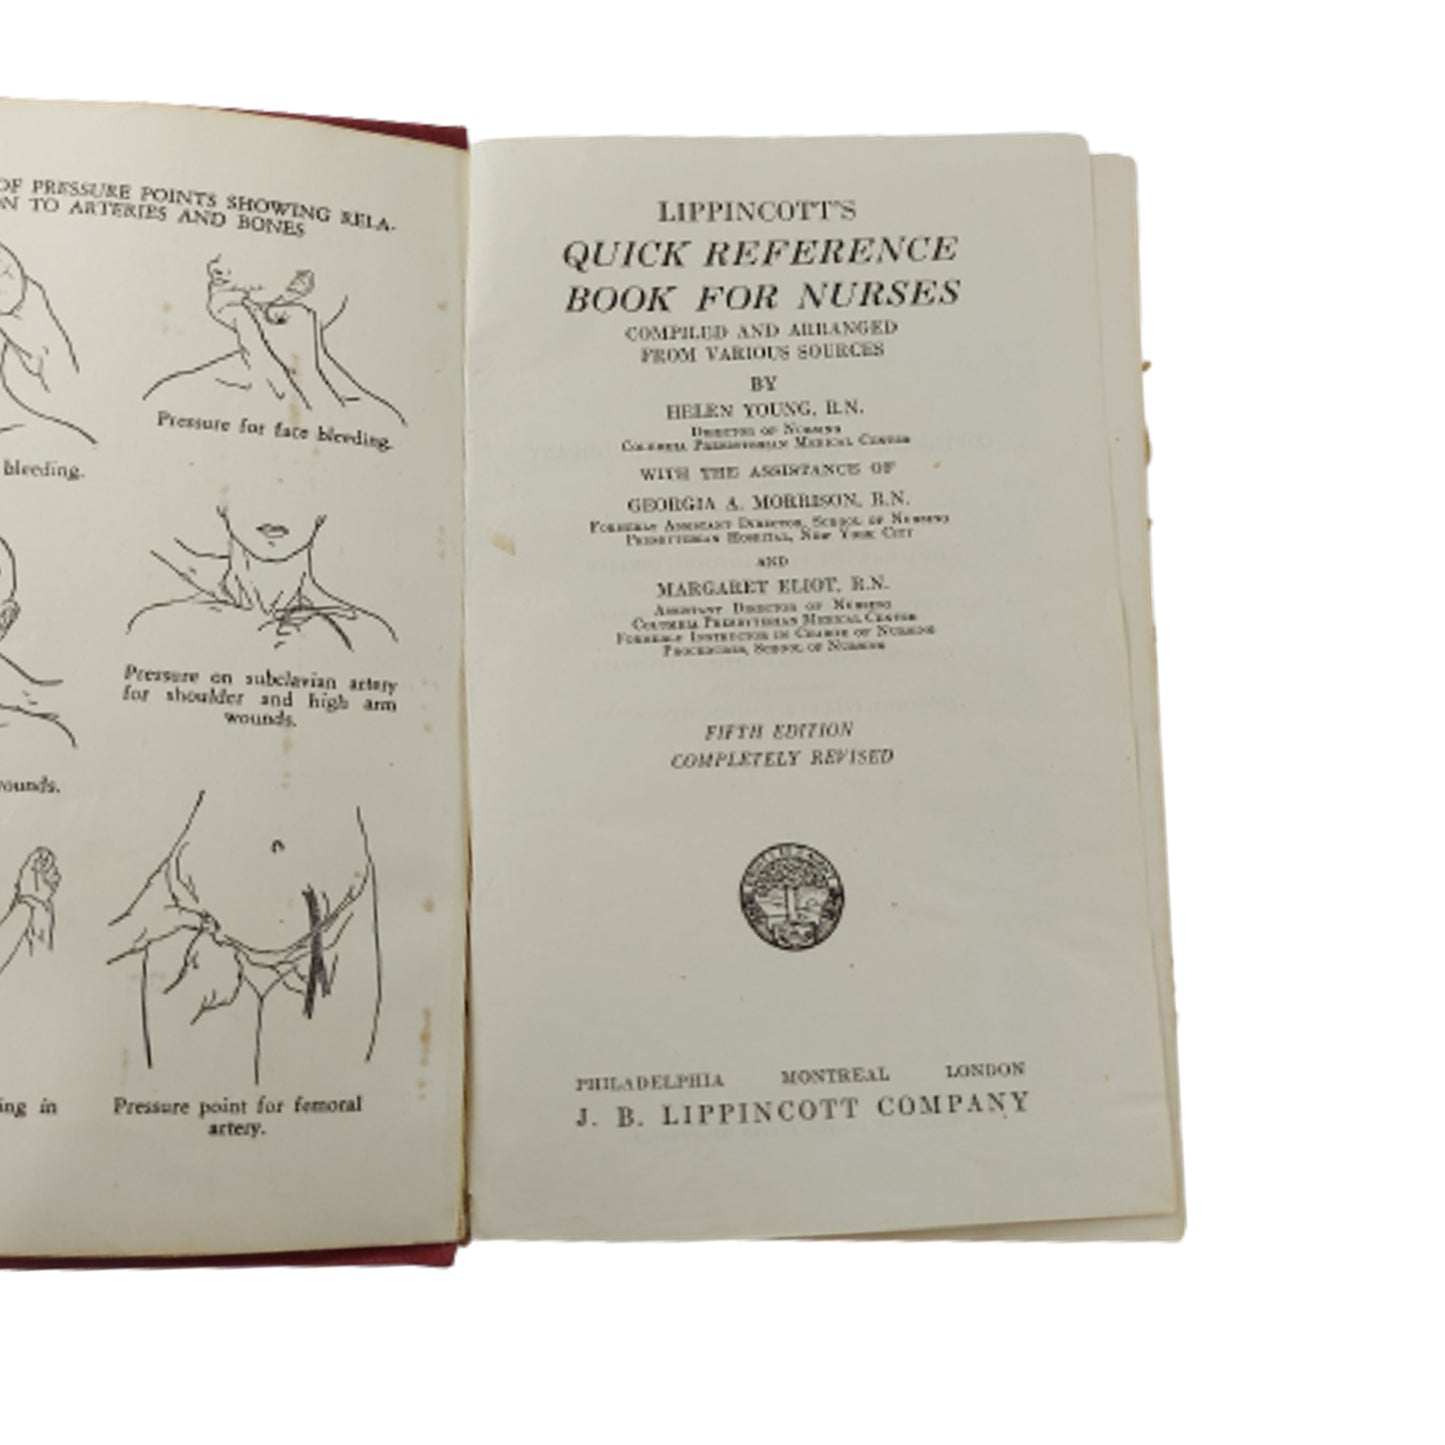 WW2 Lippincott's Quick Reference Book For Nurses 1943